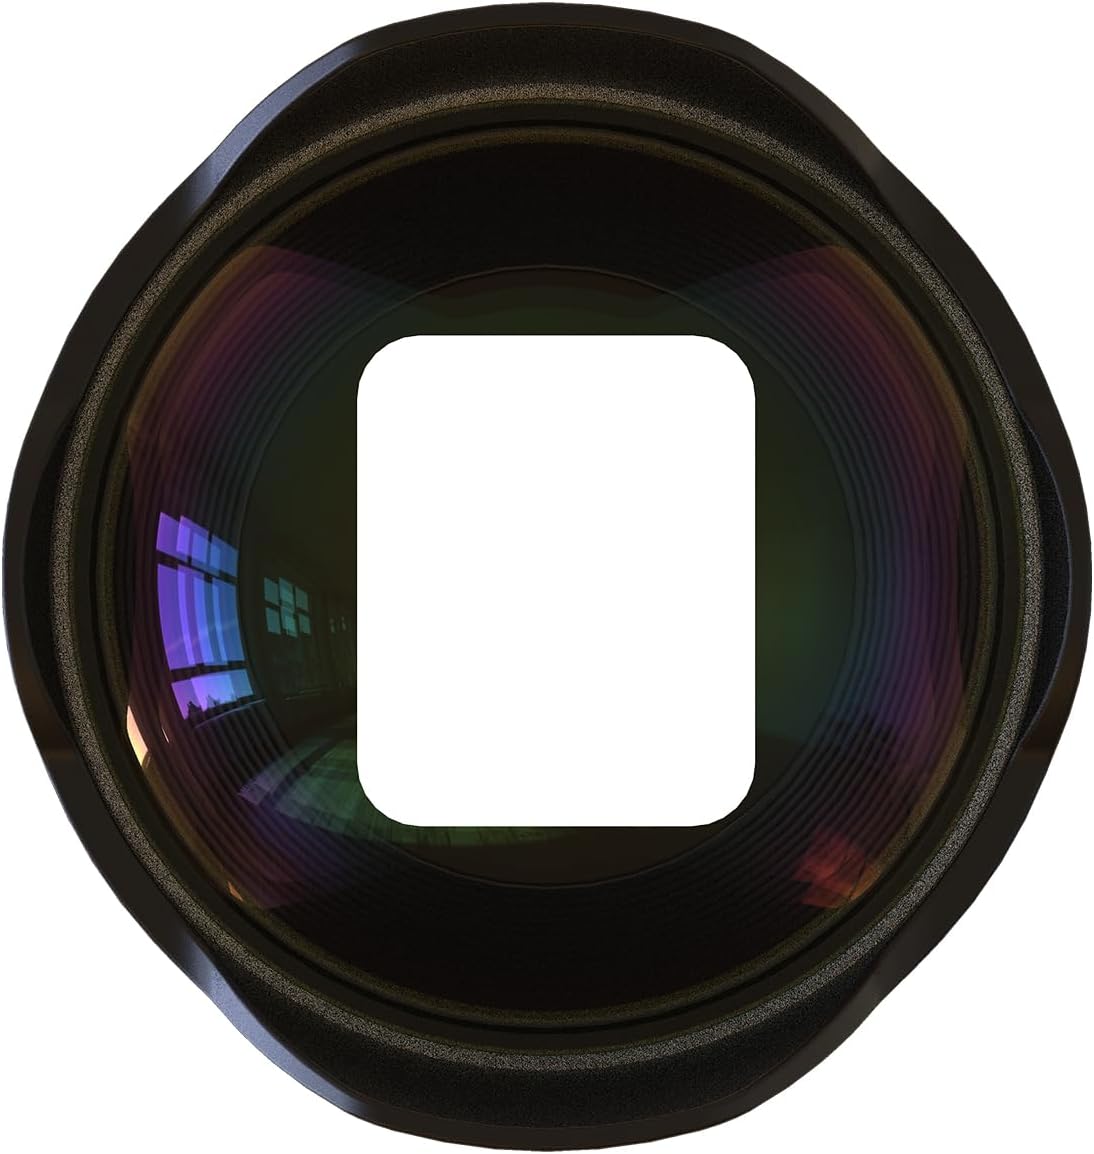 Underwater Camera Lenses and Filters